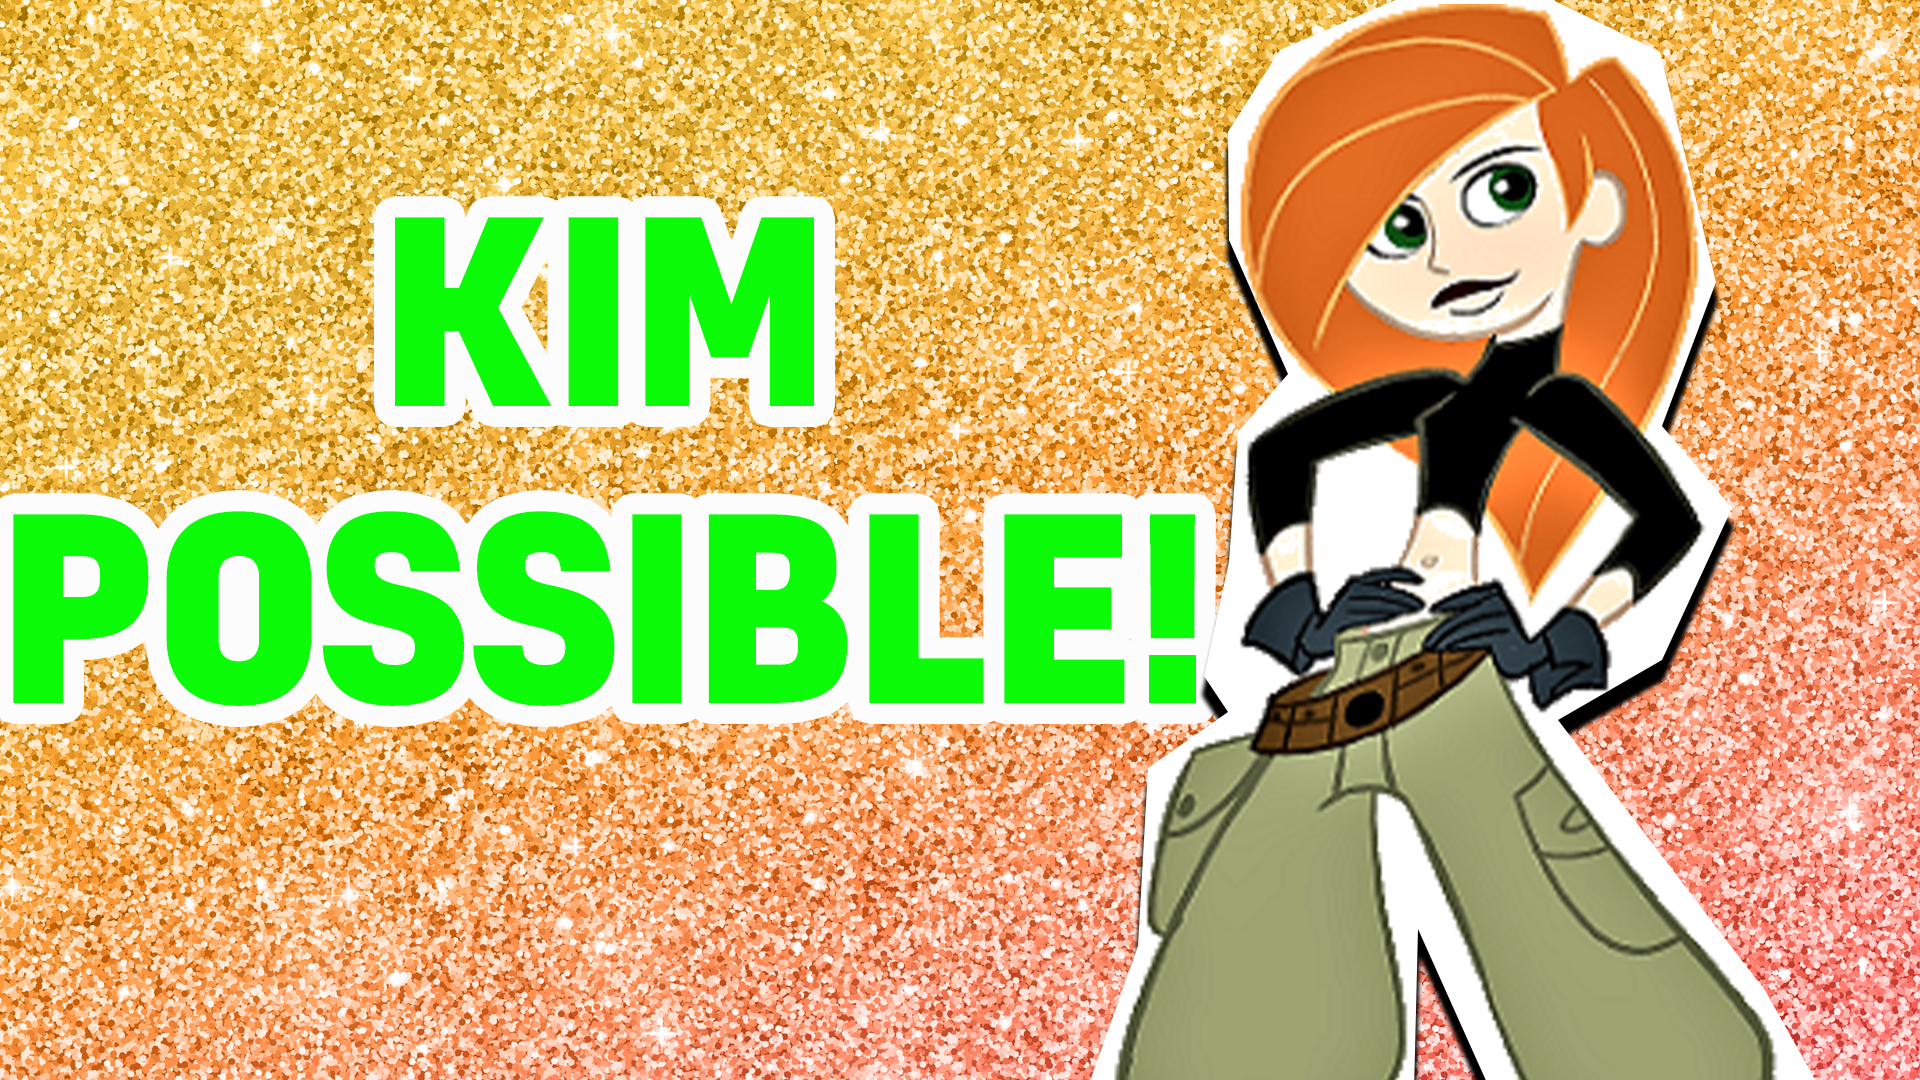 You're Kim! You're always ready to save the world! You are know for keeping your cool in tricky situations, and appreciating your friends for their help!